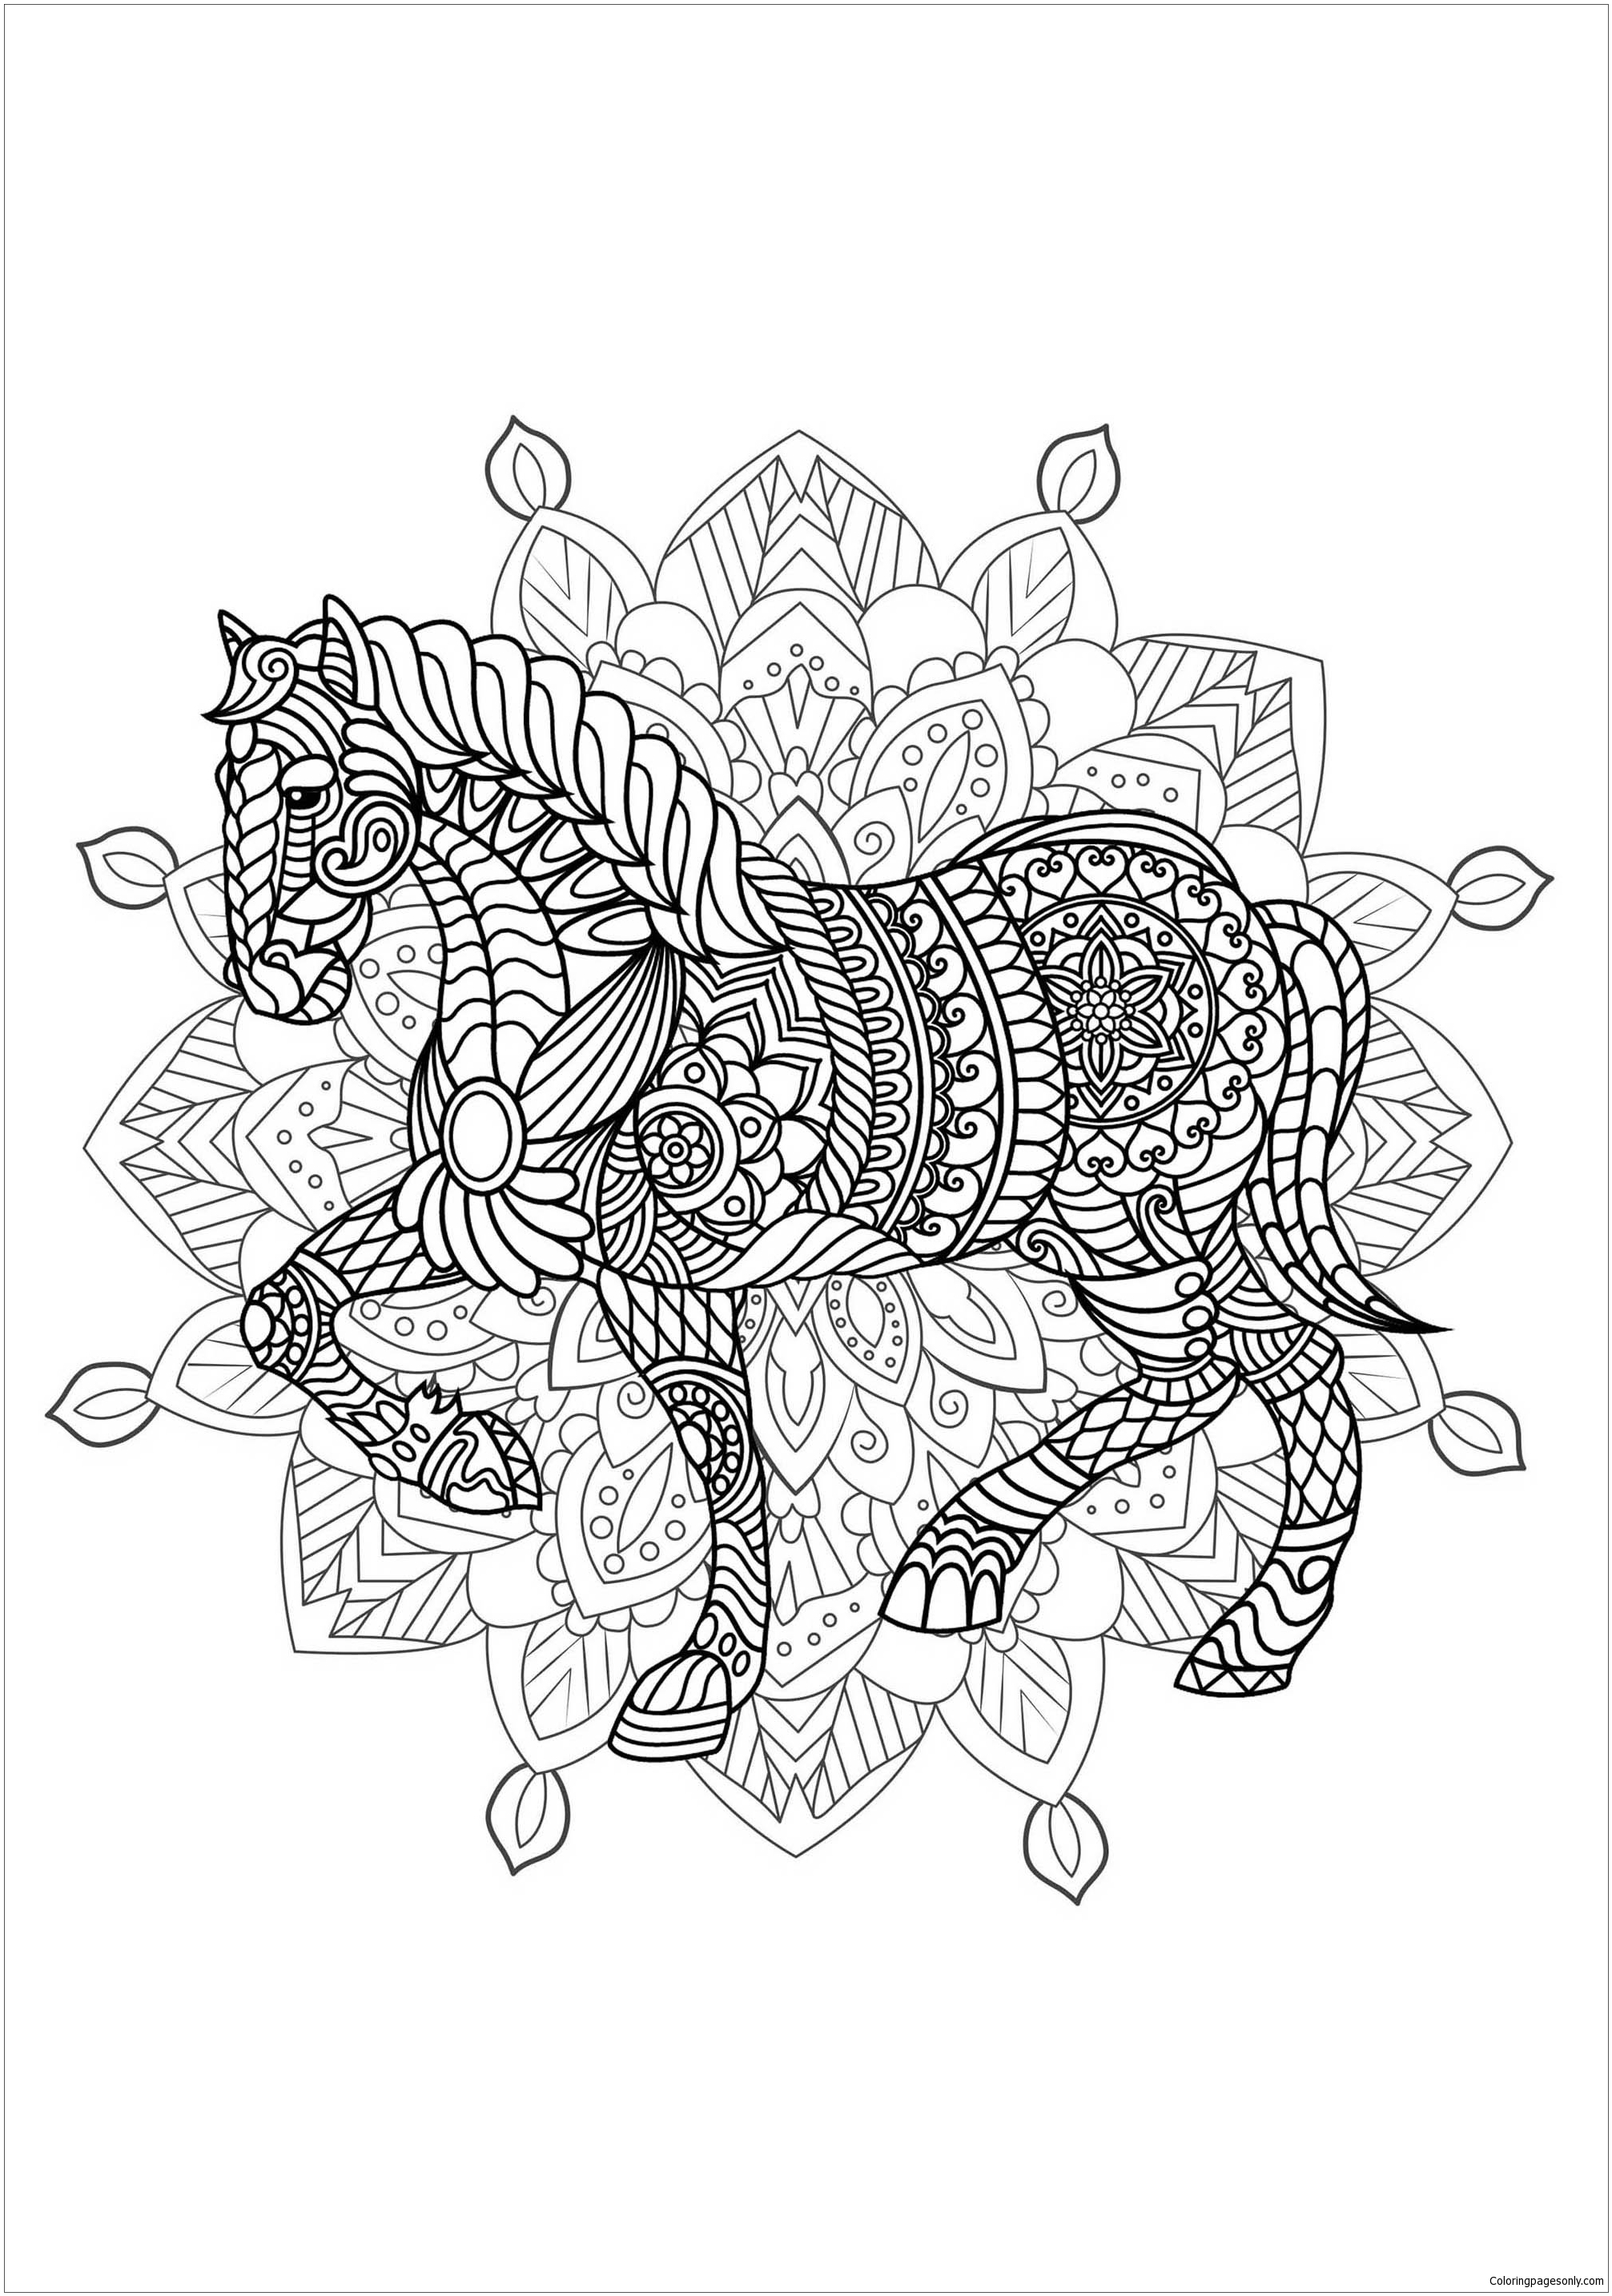 Mandala With Elegant Horse And Complex Patterns Coloring Pages